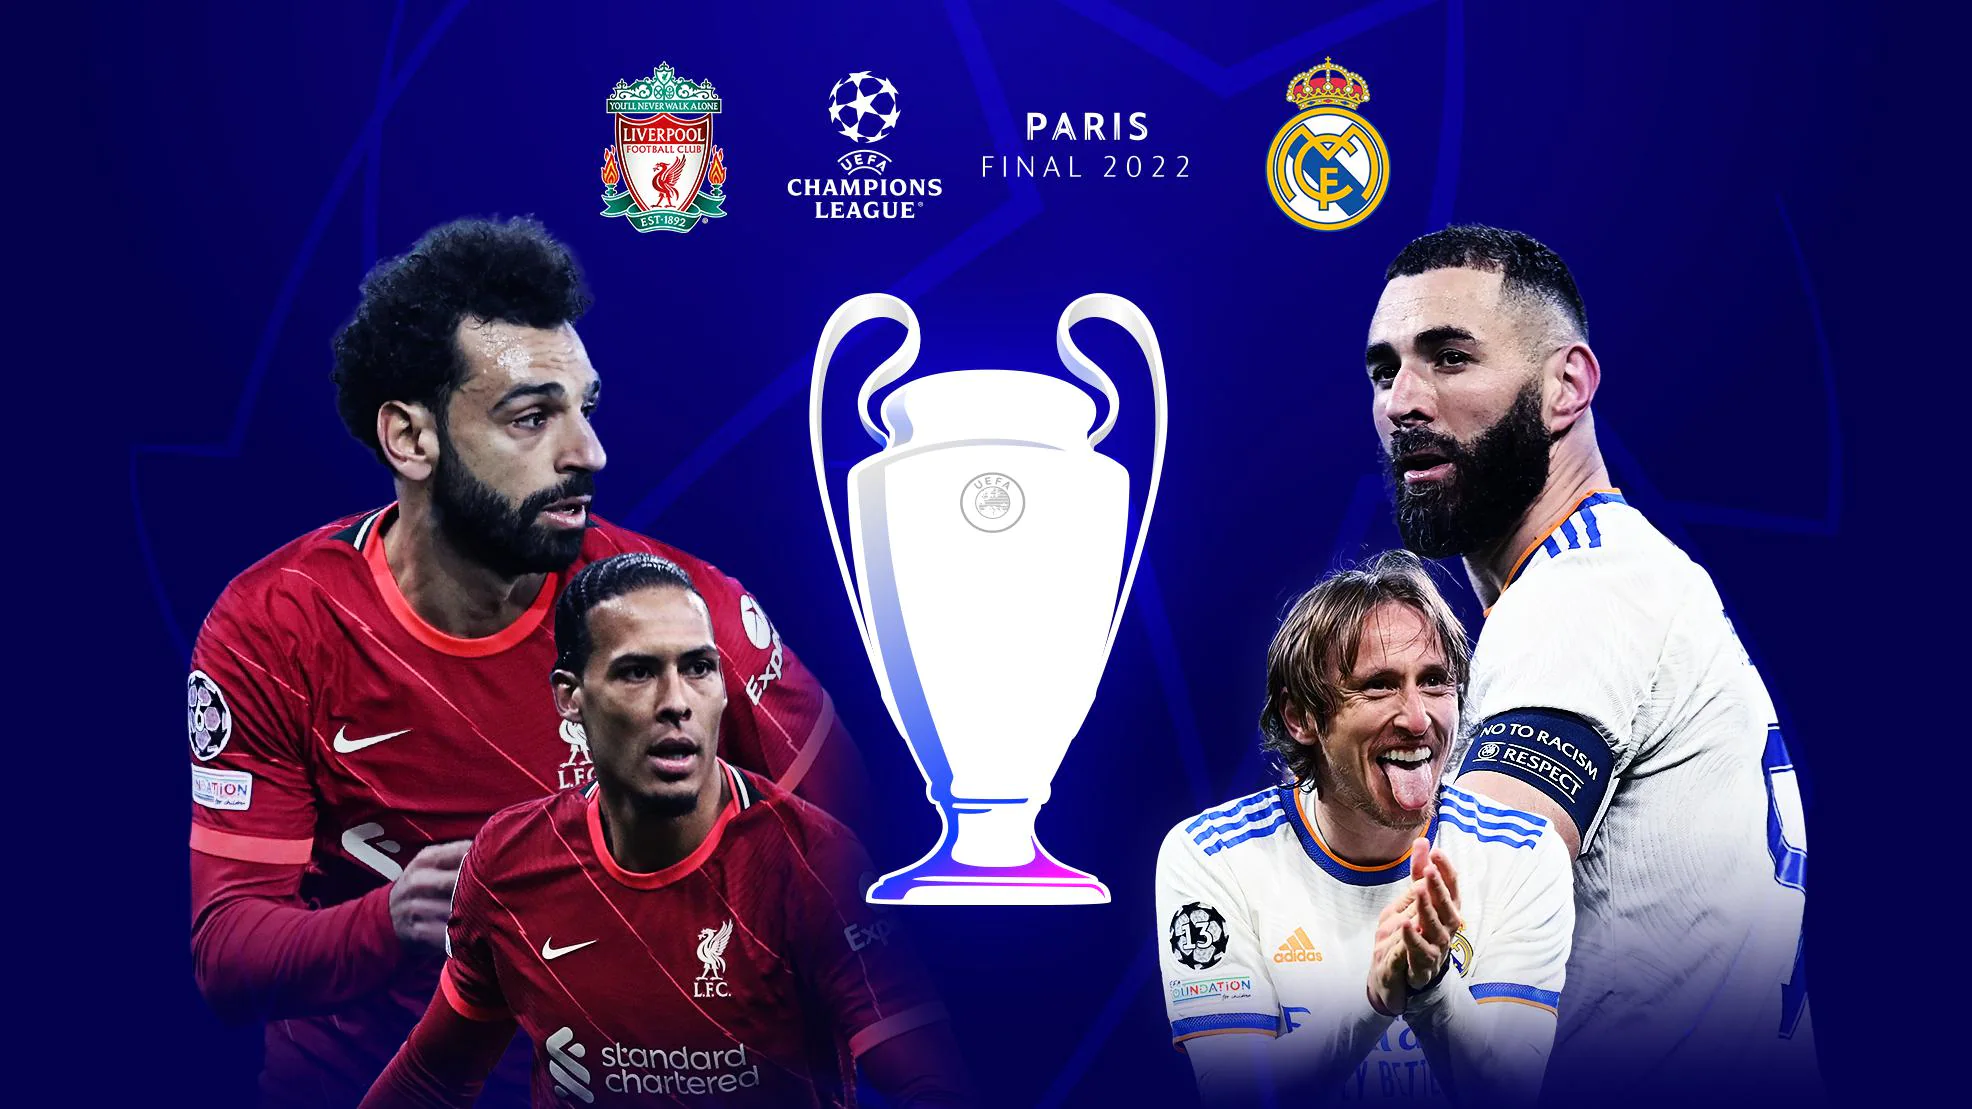 Champions League final Liverpool vs Real Madrid